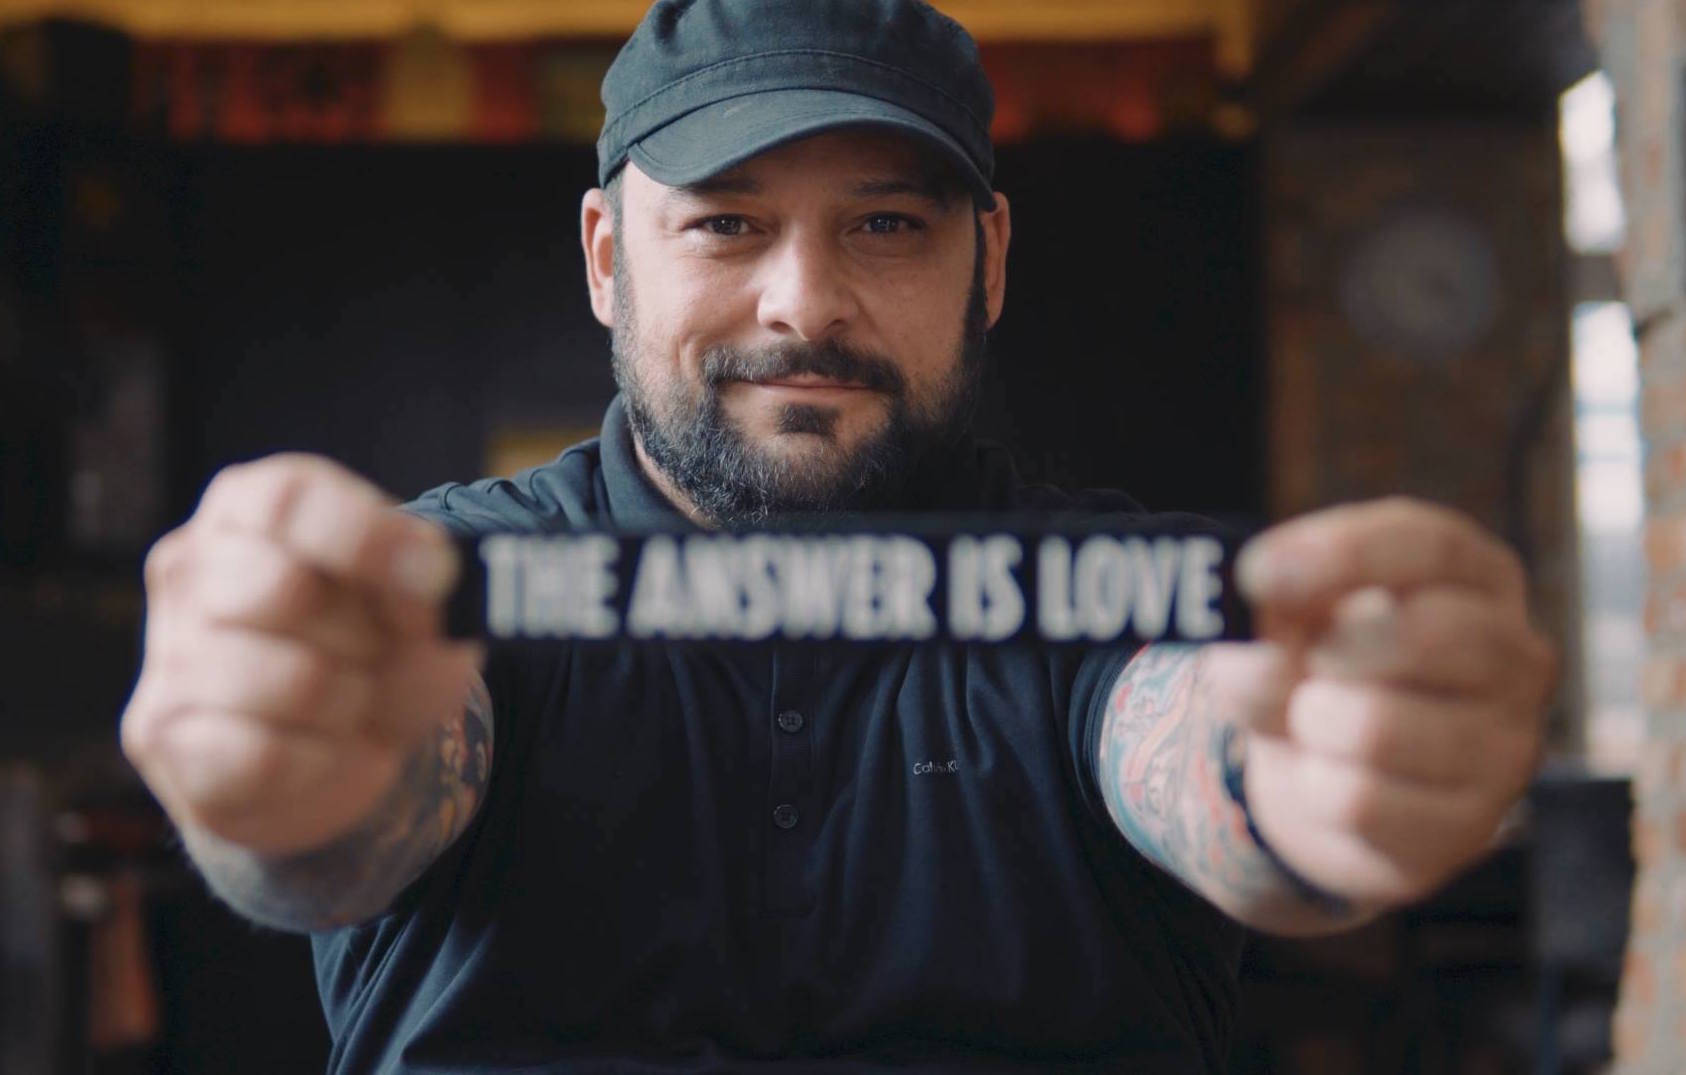 Christian Piccolini holding a sign that says 'The Answer is Love'